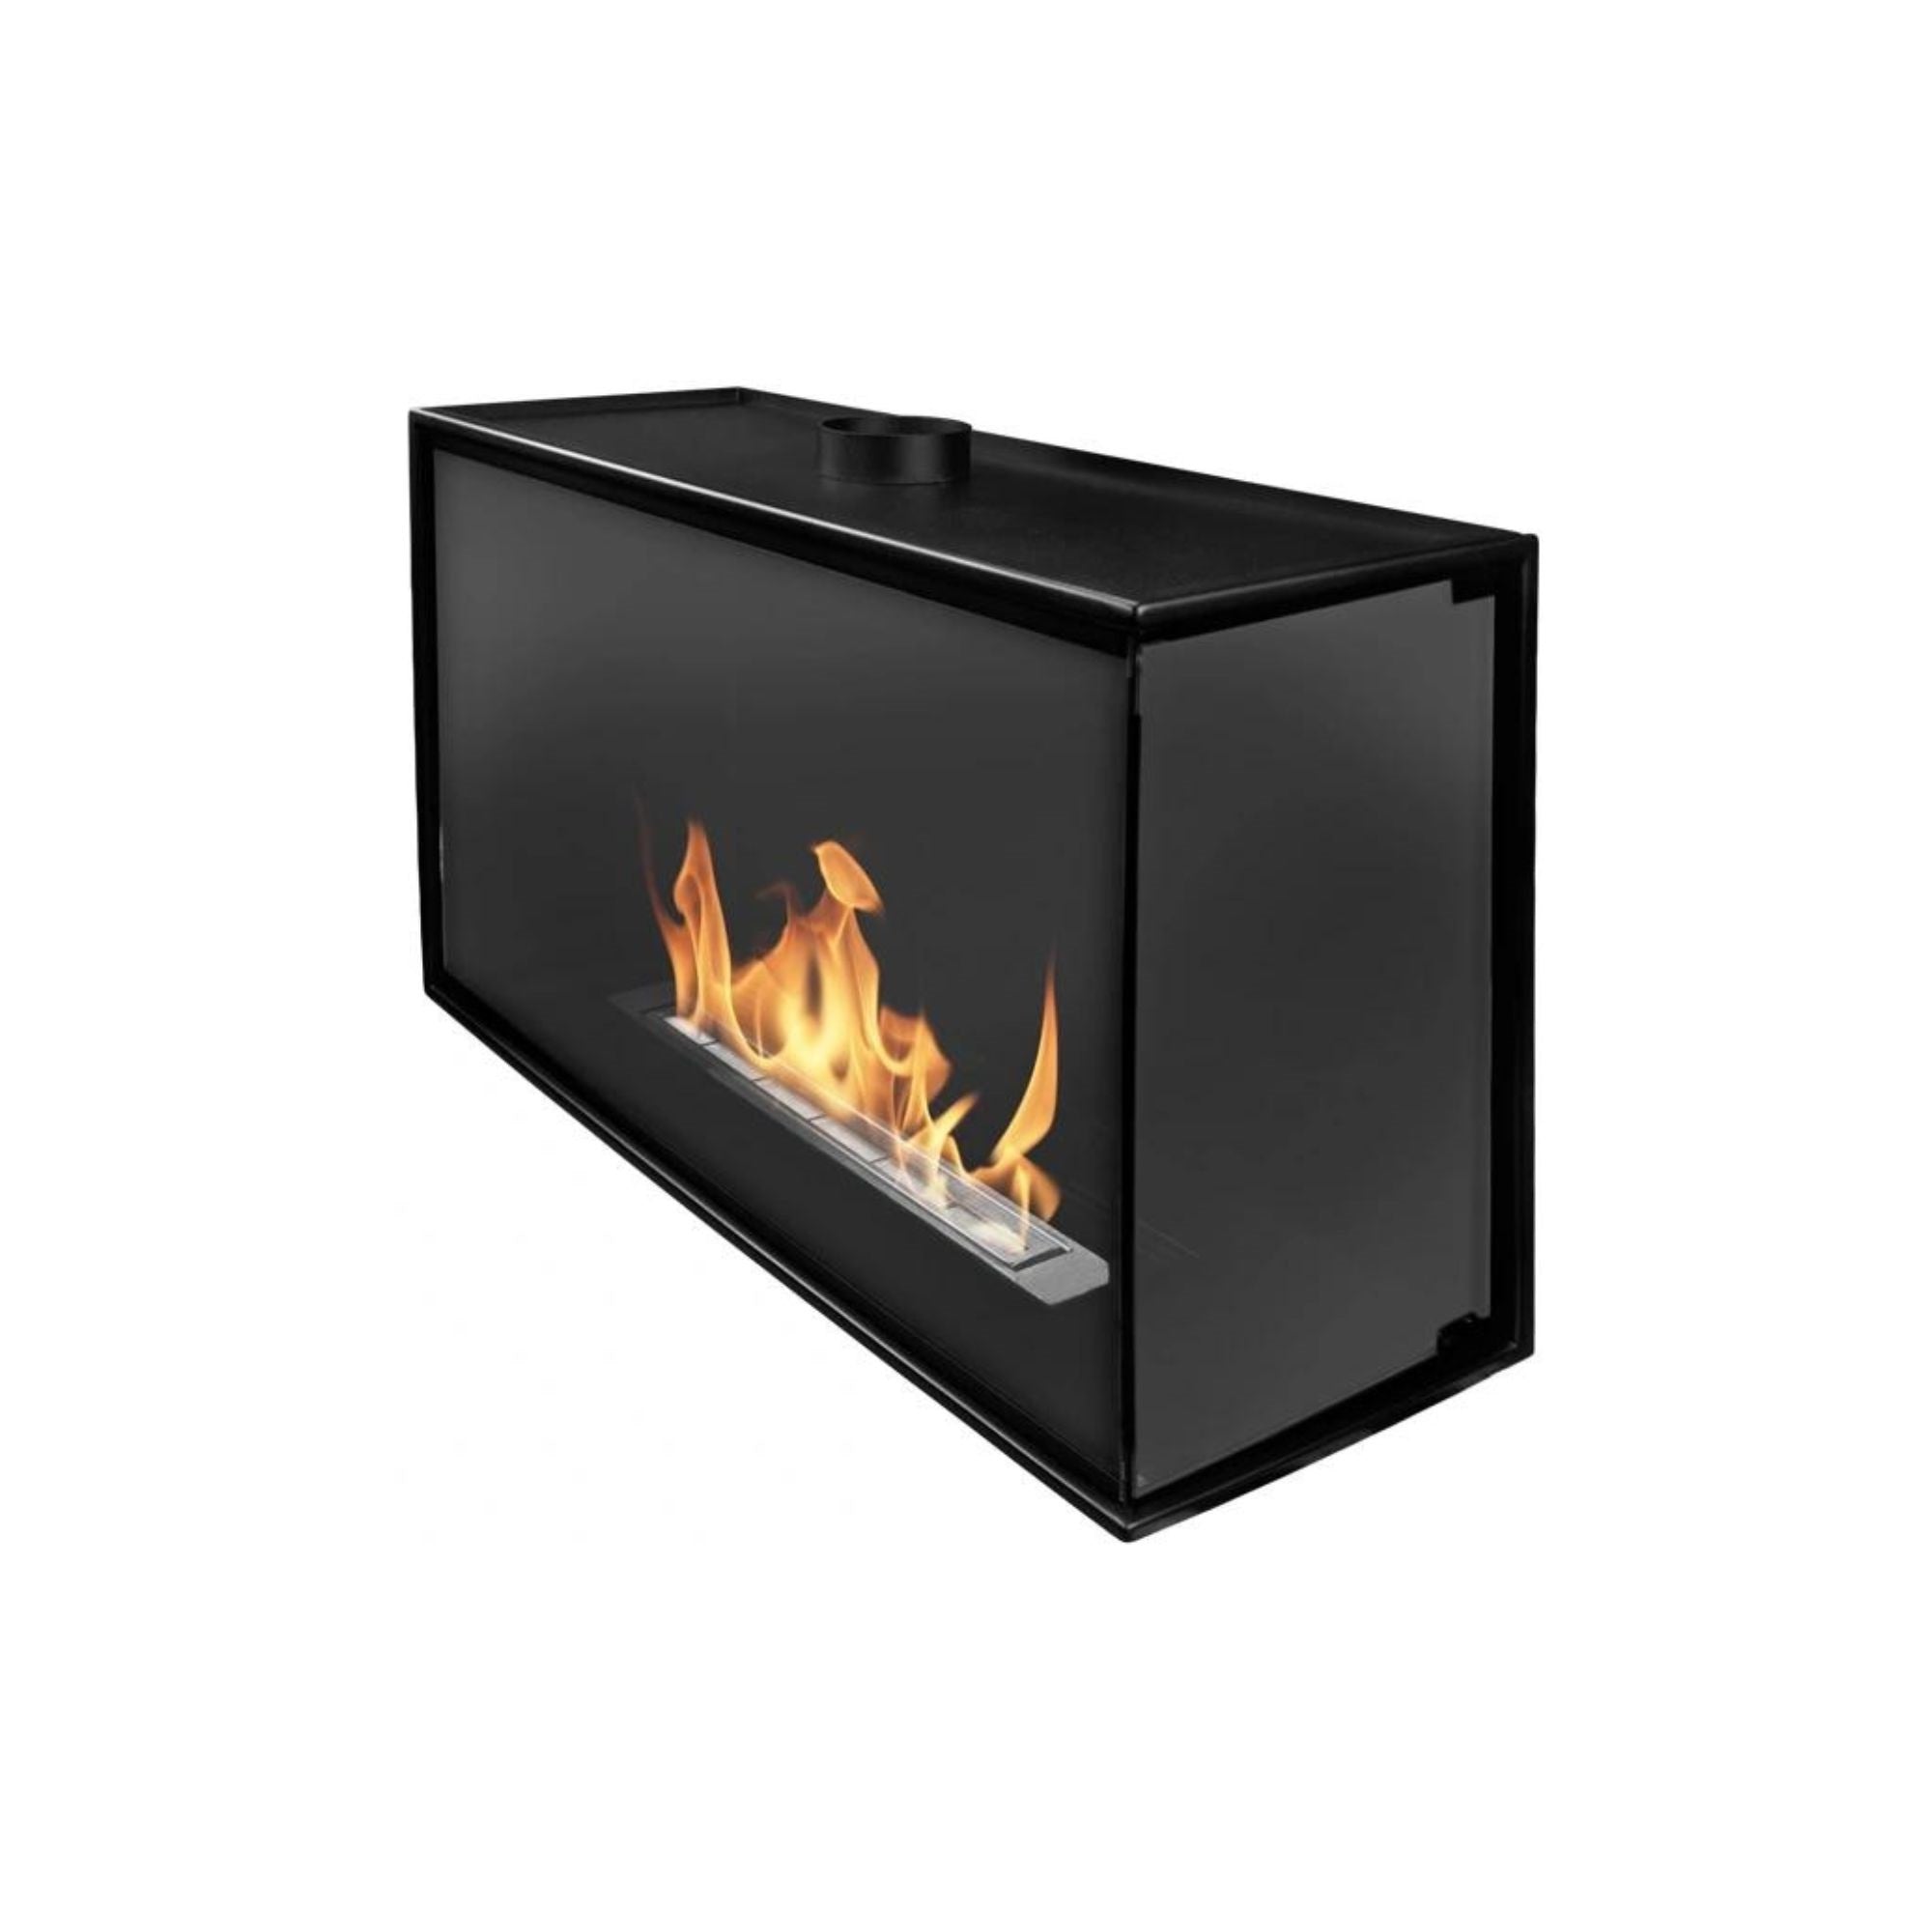 Corner Bio Ethanol Built-in Fireplace Right 60 CM With Full Glass